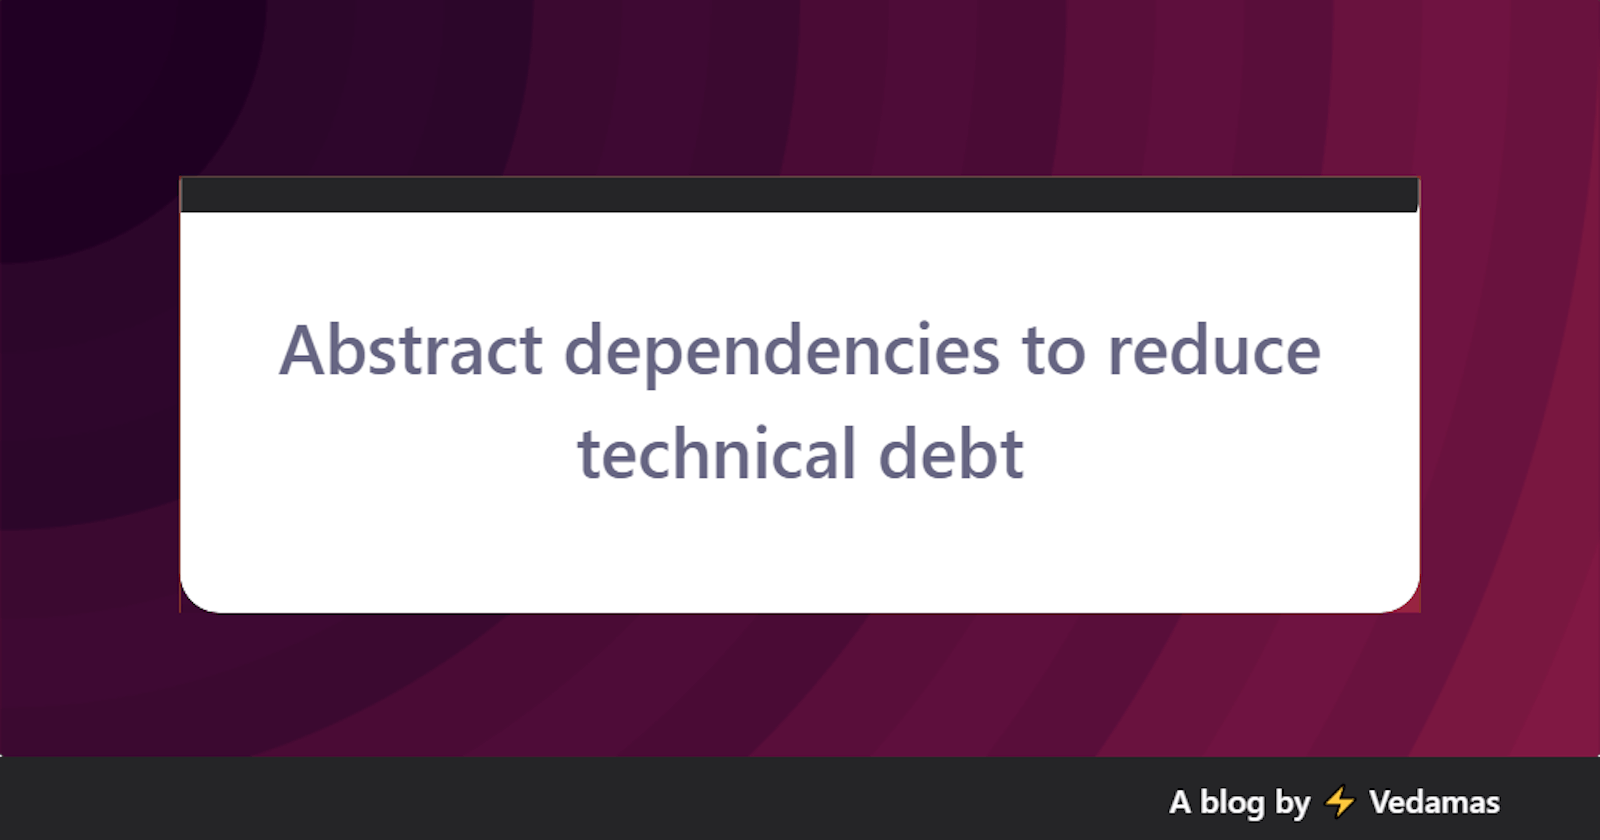 Abstract dependencies to reduce technical debt